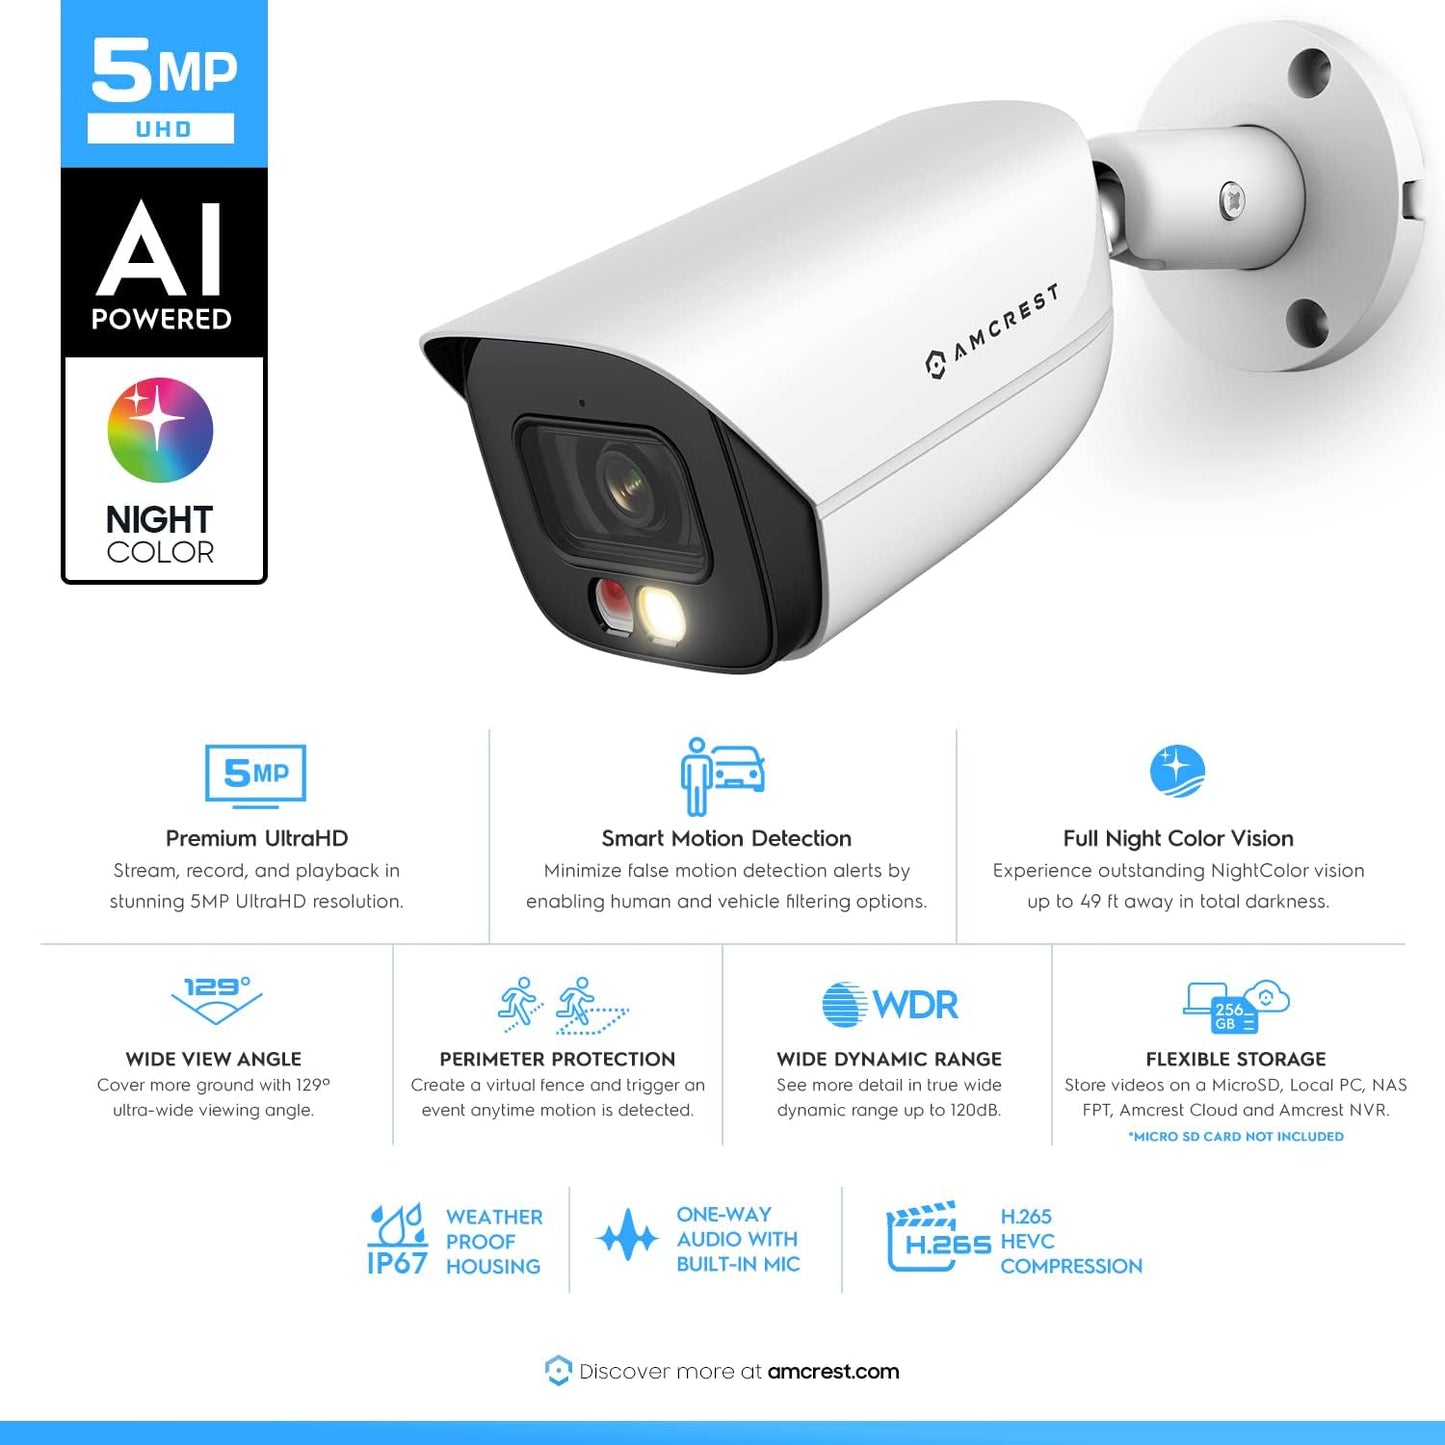 Amcrest 5MP Security Camera System, 4K 8CH PoE NVR, (4) x 5-Megapixel Night Color Bullet POE IP Cameras, Active Deterrent, Pre-Installed 2TB Hard Drive, NV4108E-B1276EW4-2TB (White) (White)